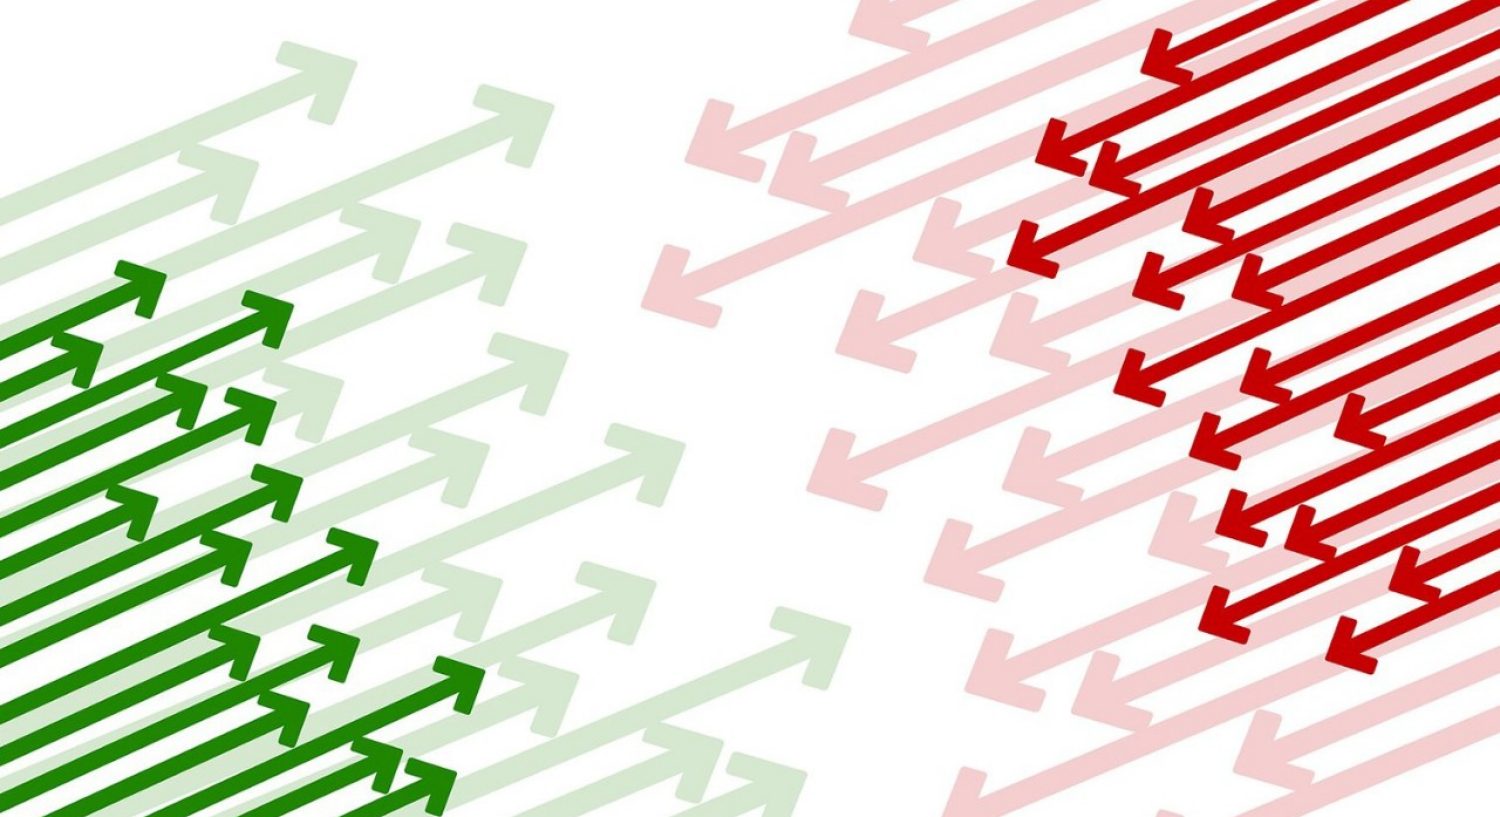 Red and green arrows pointing at each other